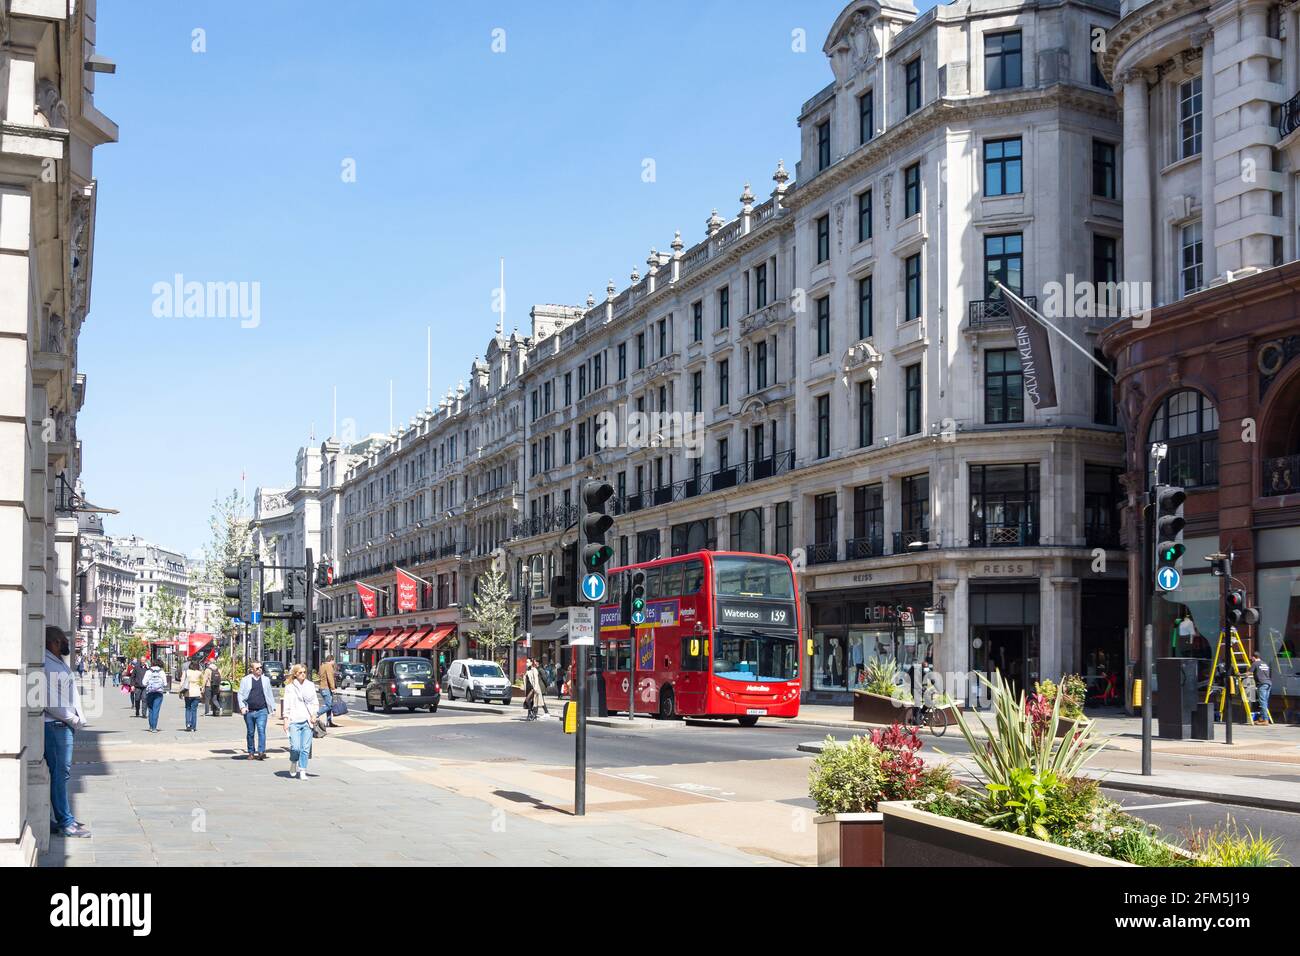 Bus à impériale, Regent Street, Soho, City of Westminster, Greater London, Angleterre, Royaume-Uni Banque D'Images